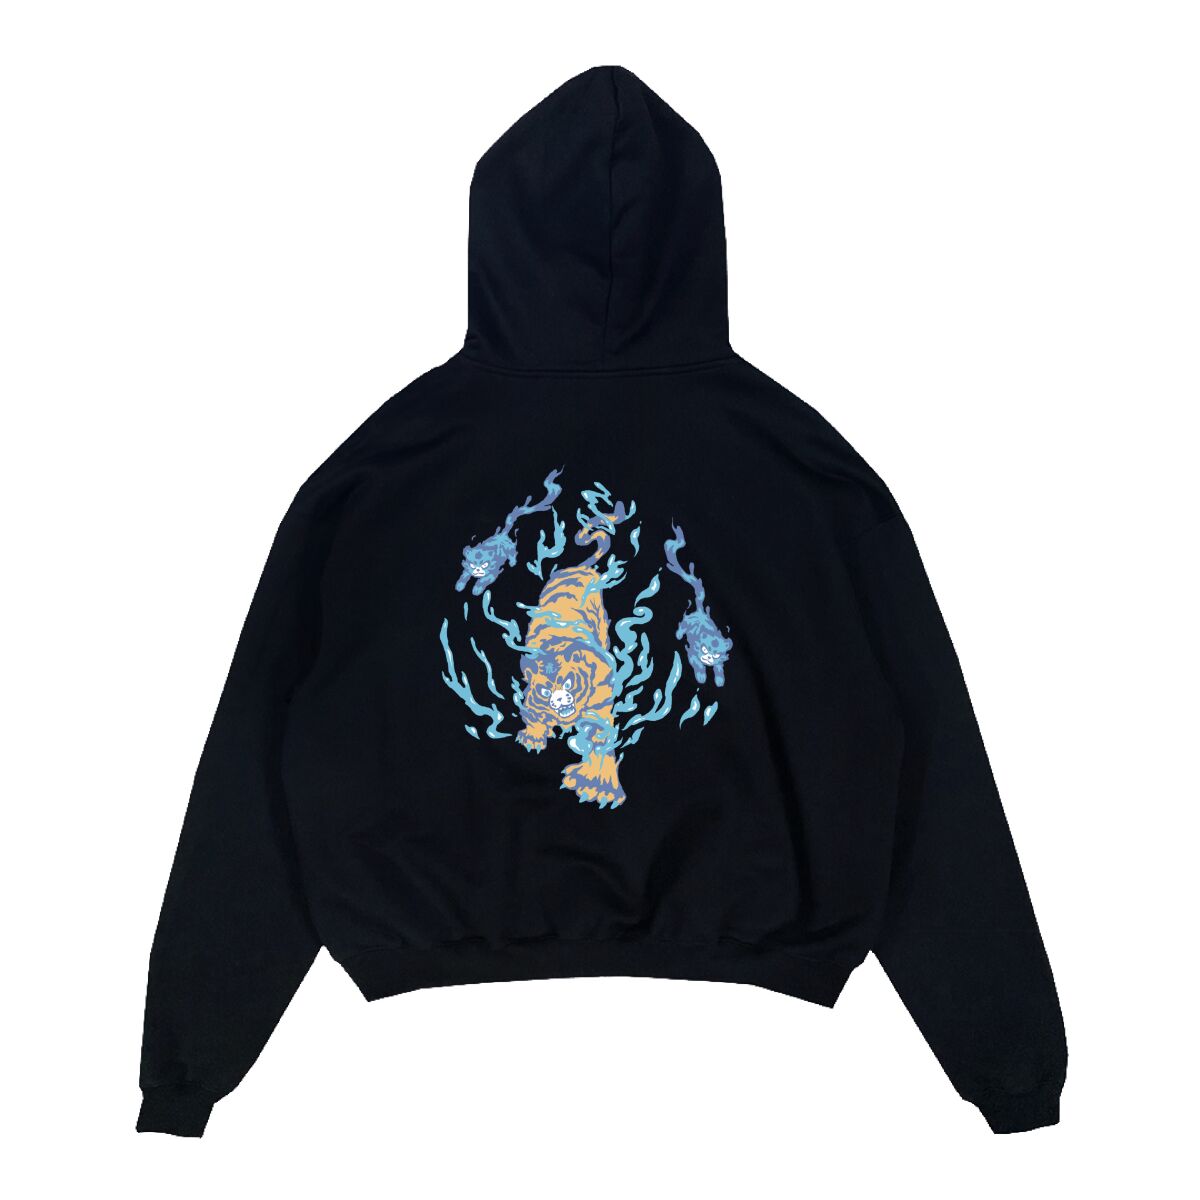 A black hooded sweatshirt with a tiger design.